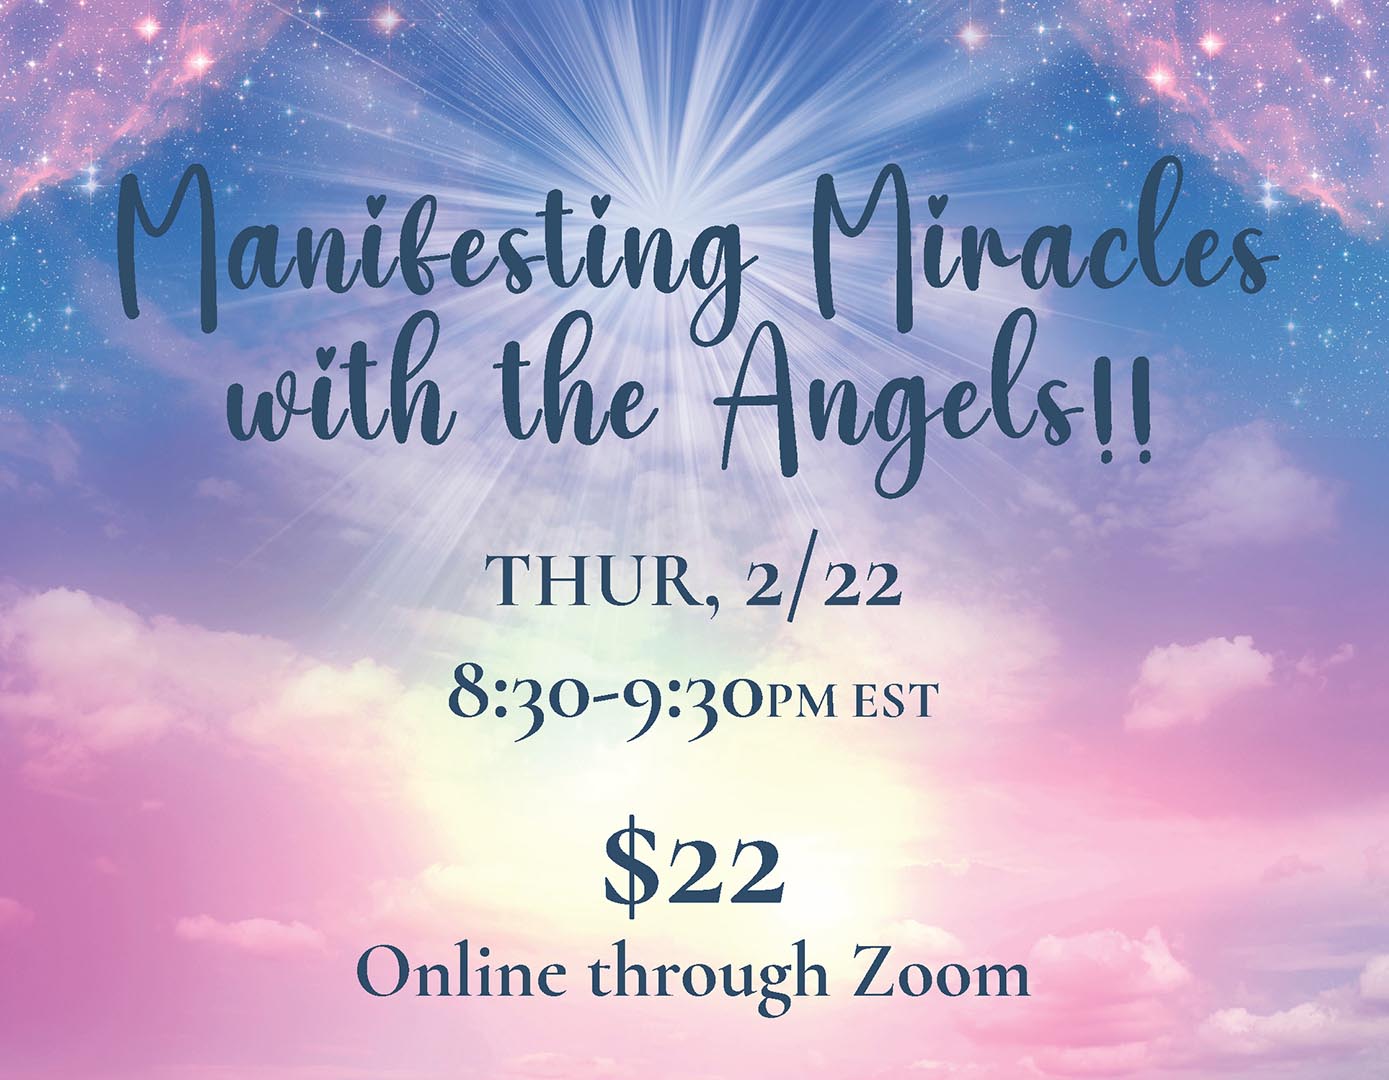 Manifesting Miracles with the Angels!!